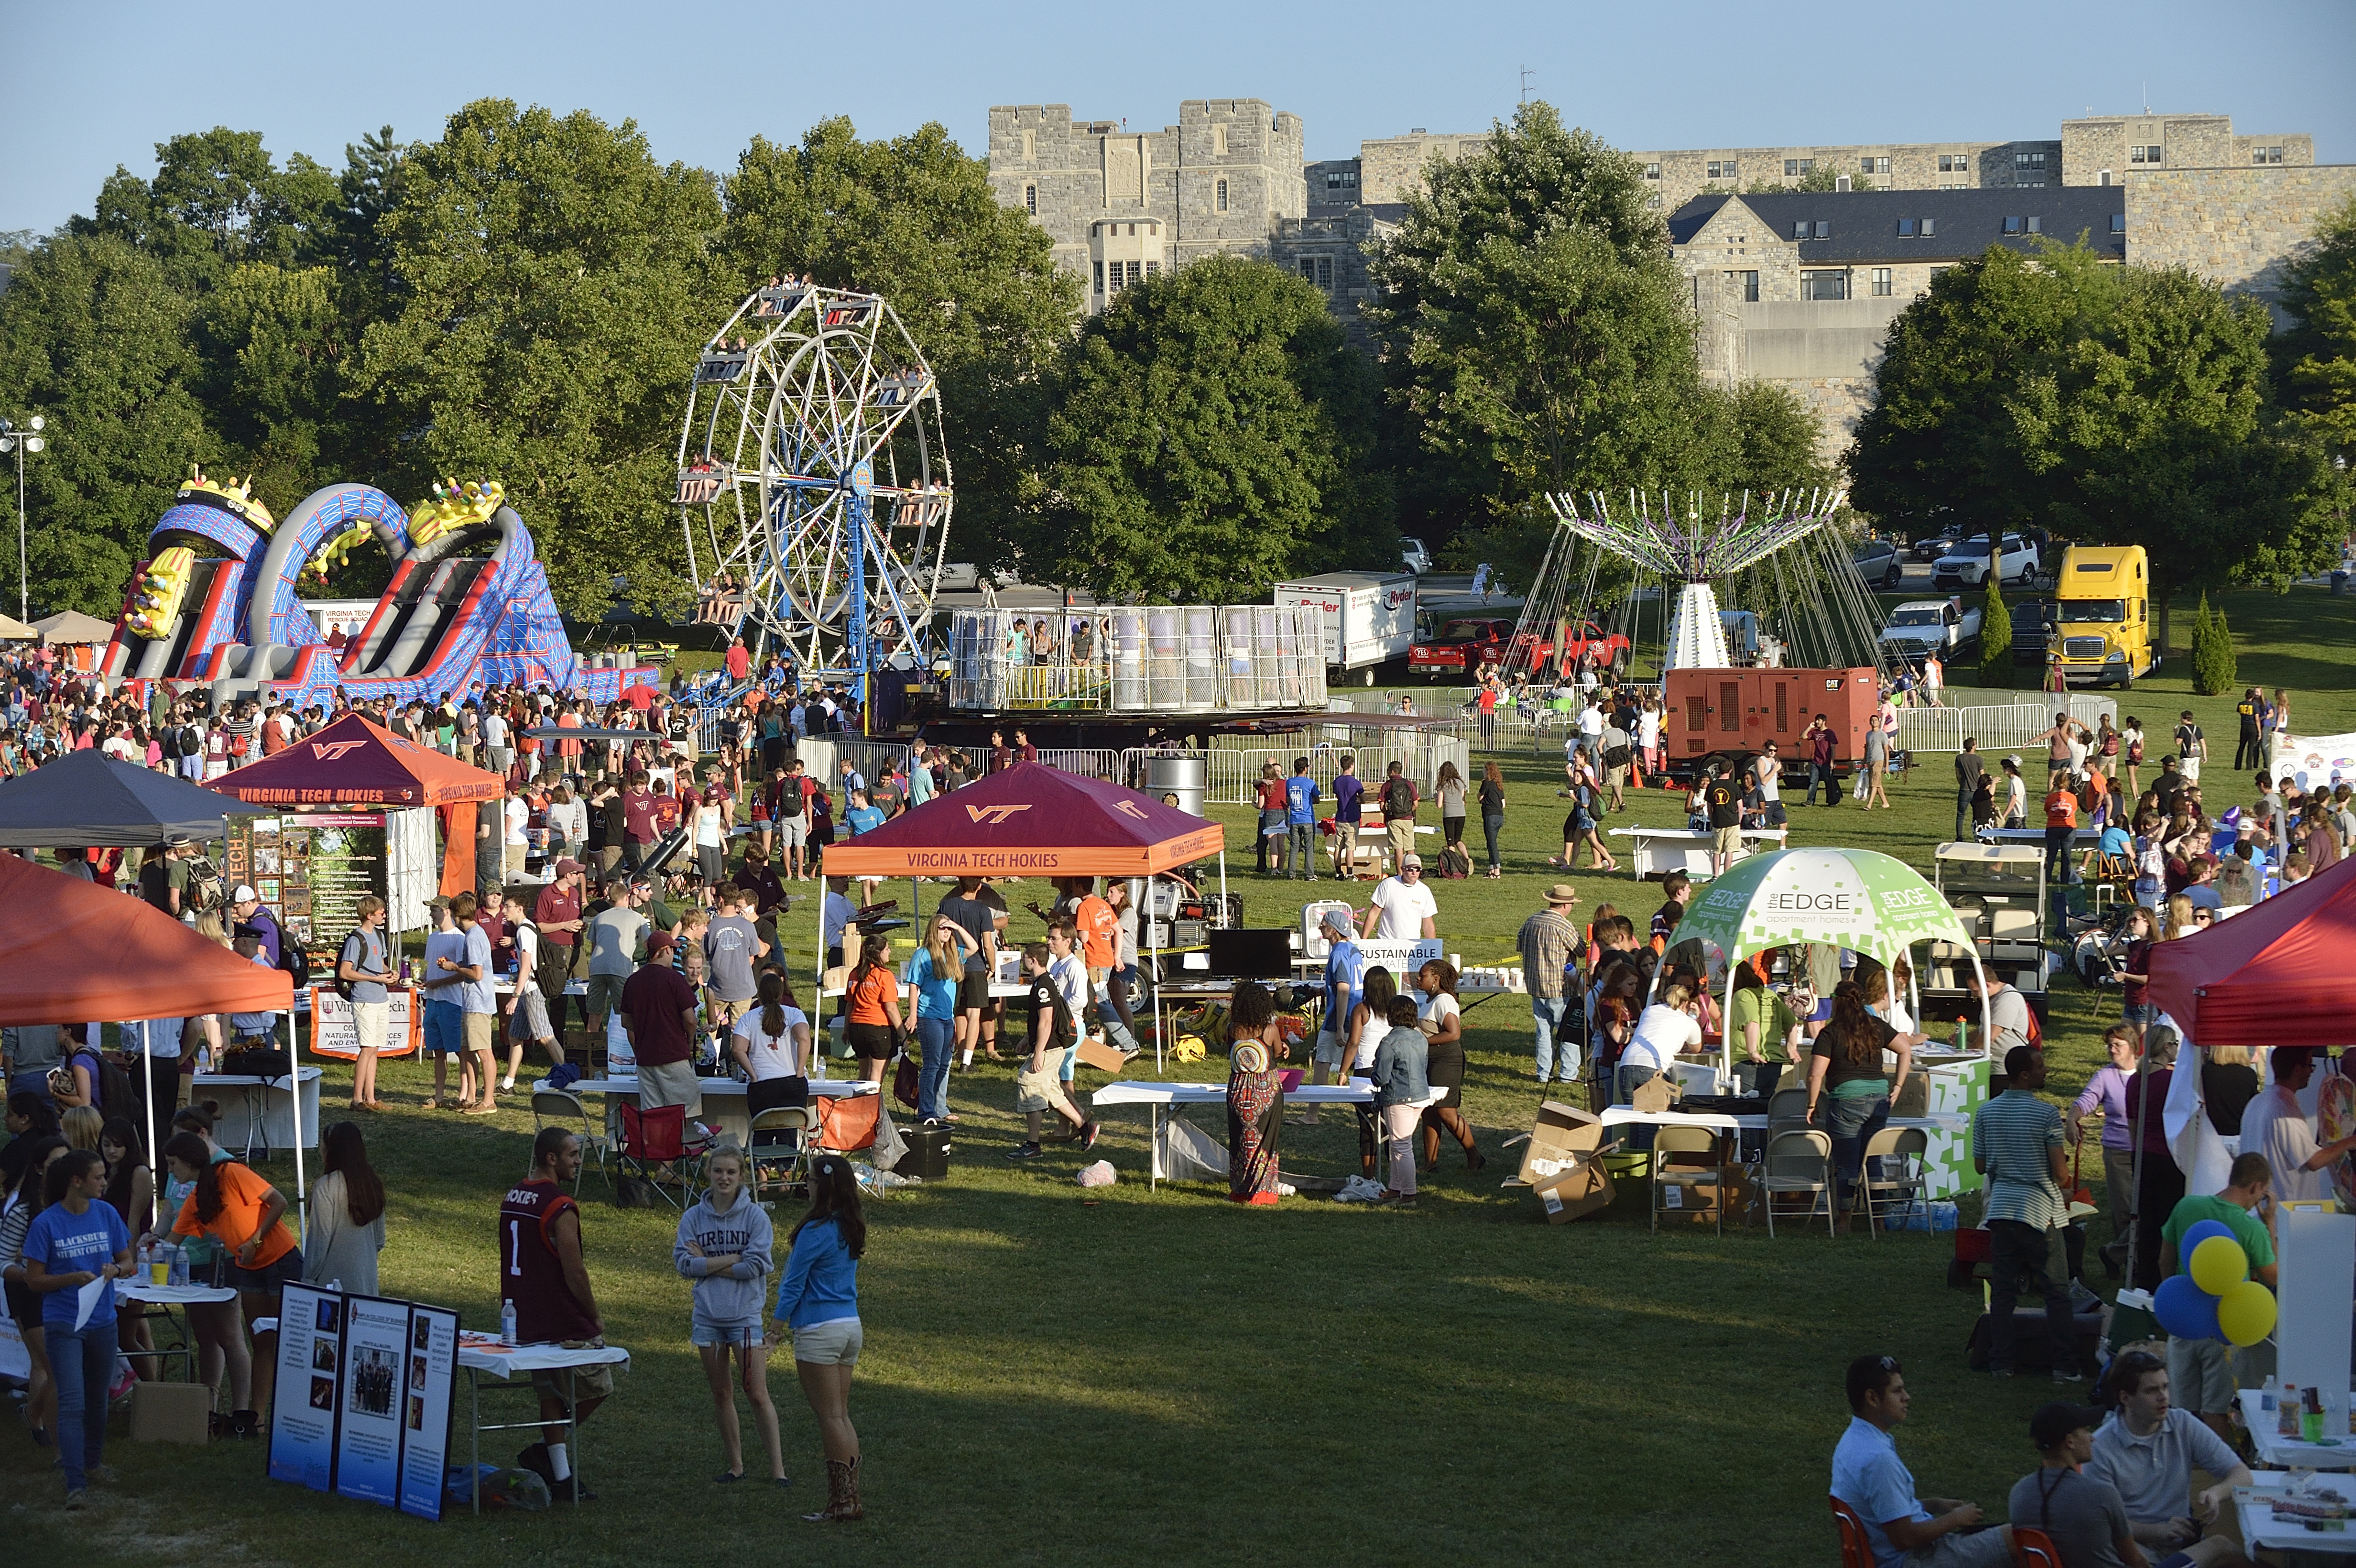 The Drillfield filled with tents, rides, and people during Gobblerfest 2013